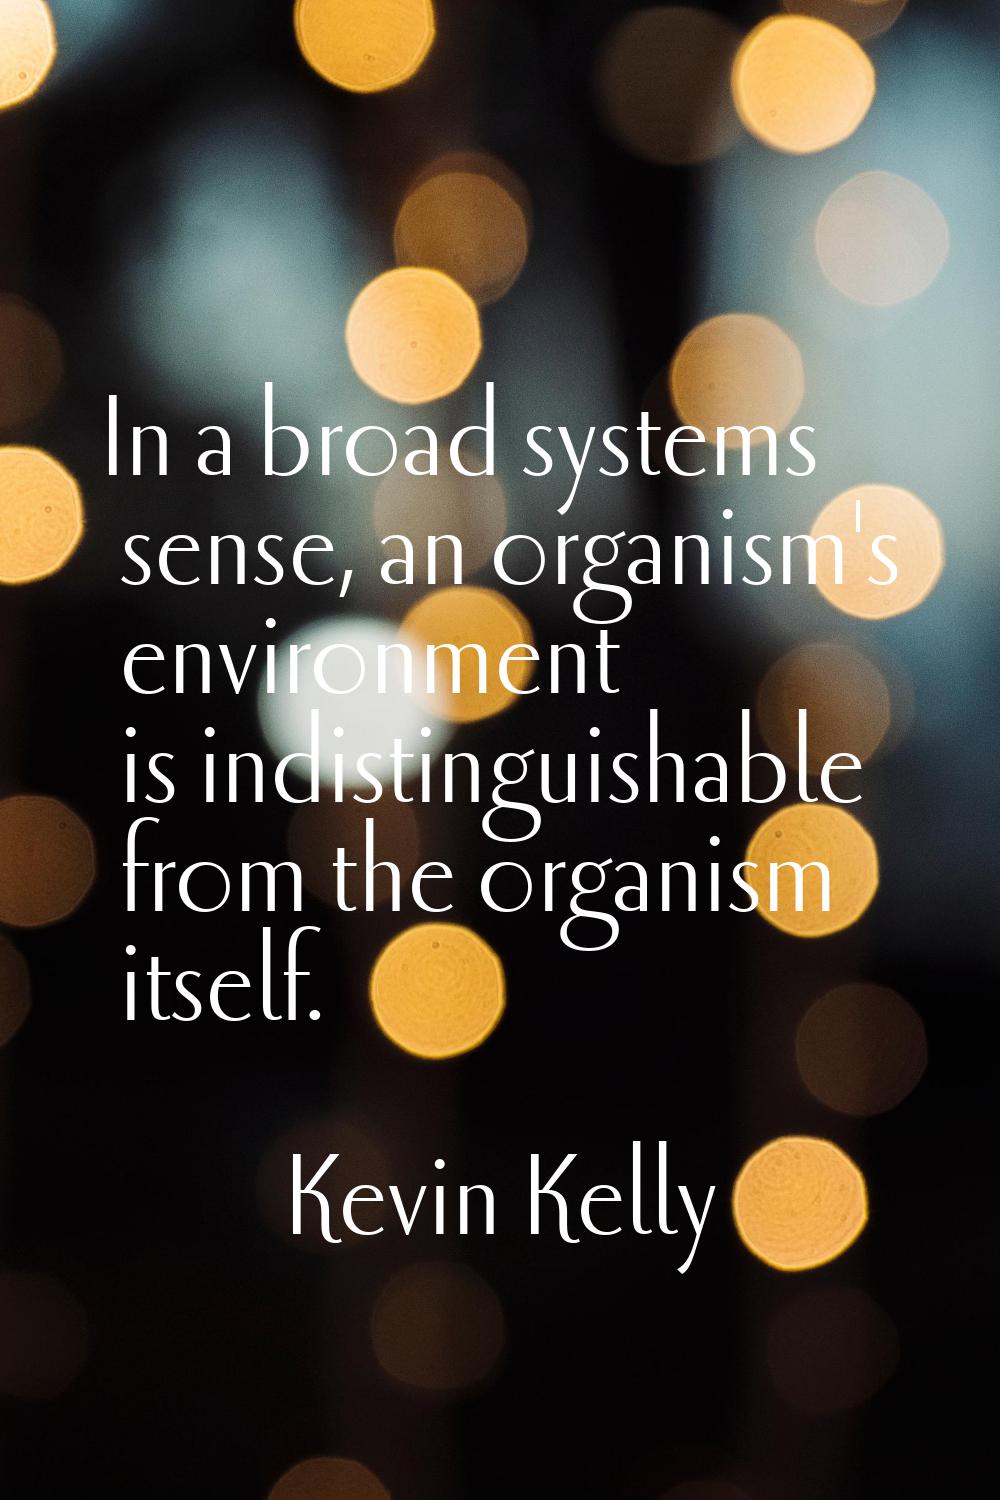 In a broad systems sense, an organism's environment is indistinguishable from the organism itself.